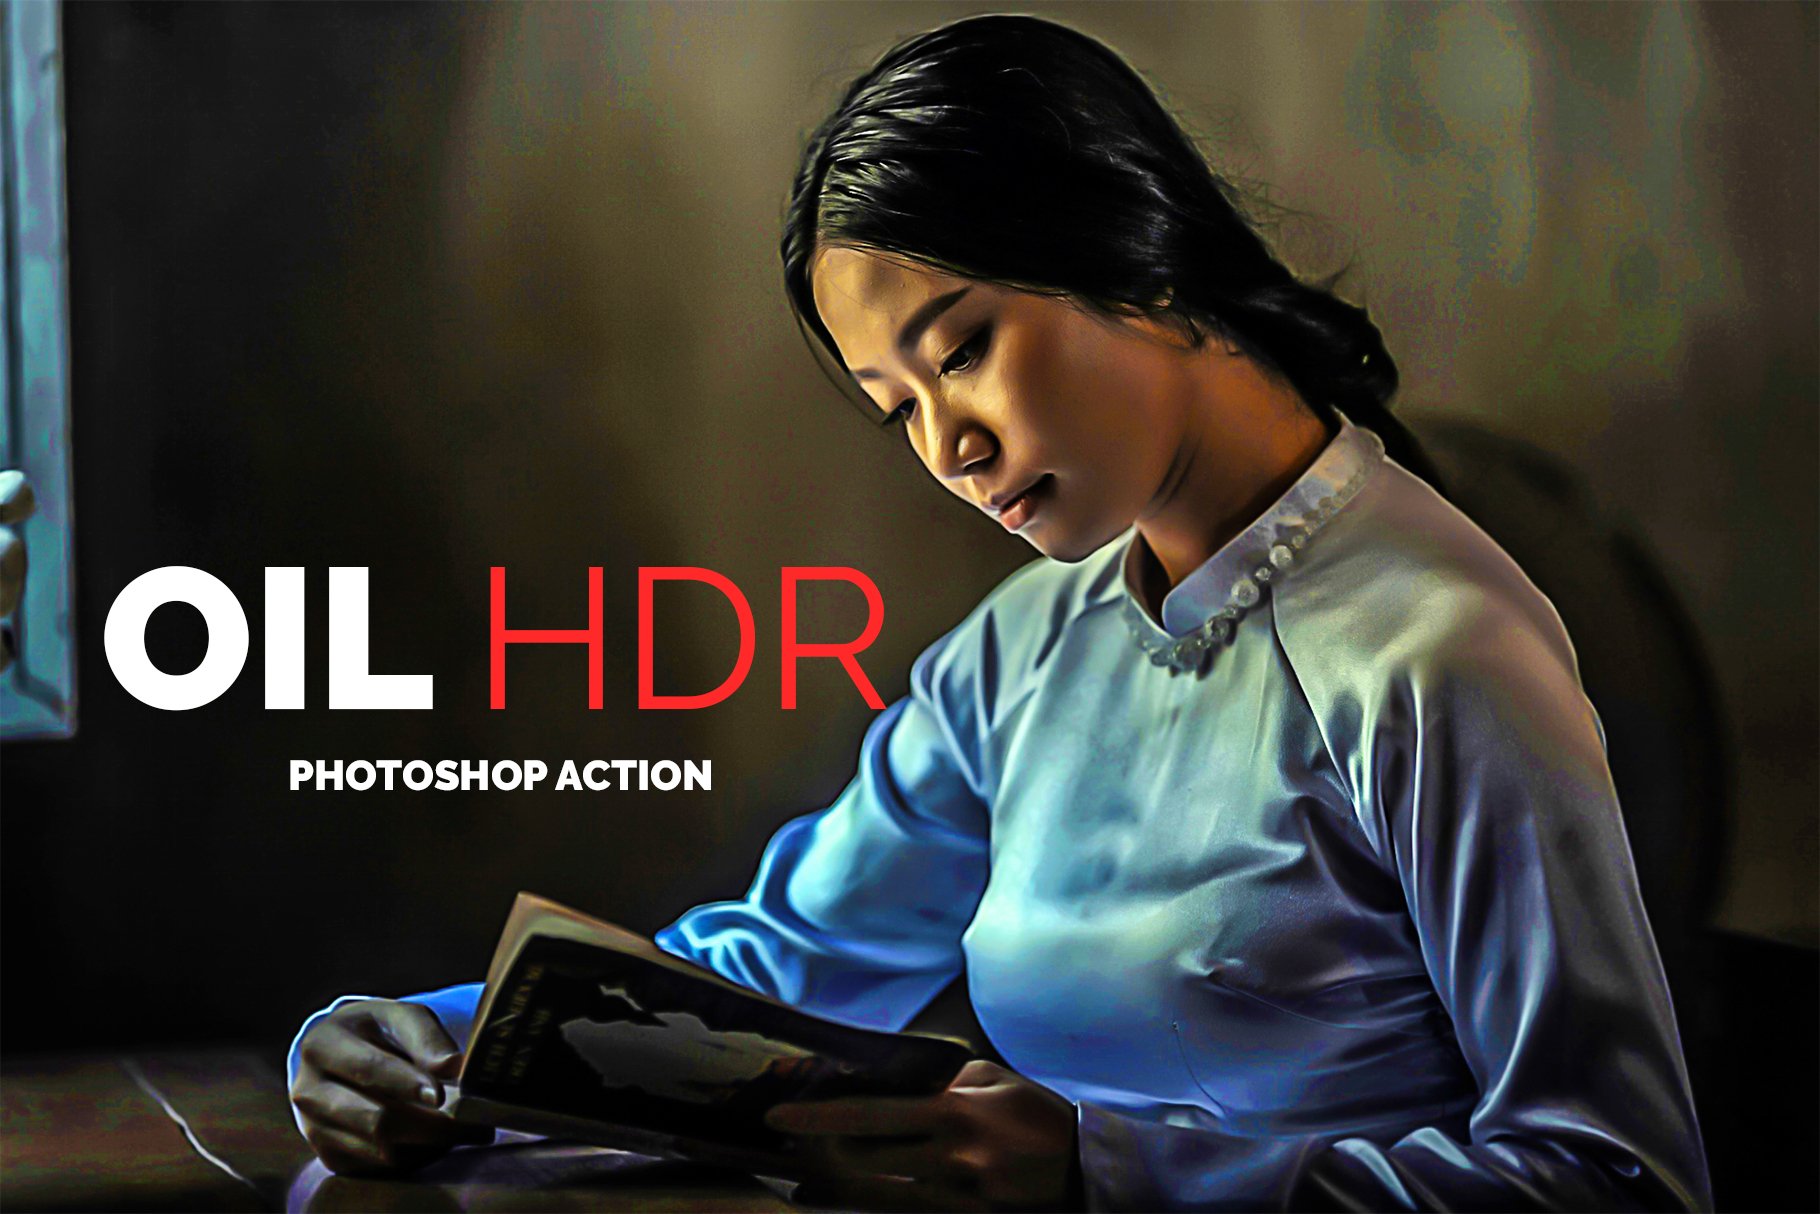 Oil HDR Photoshop Actioncover image.